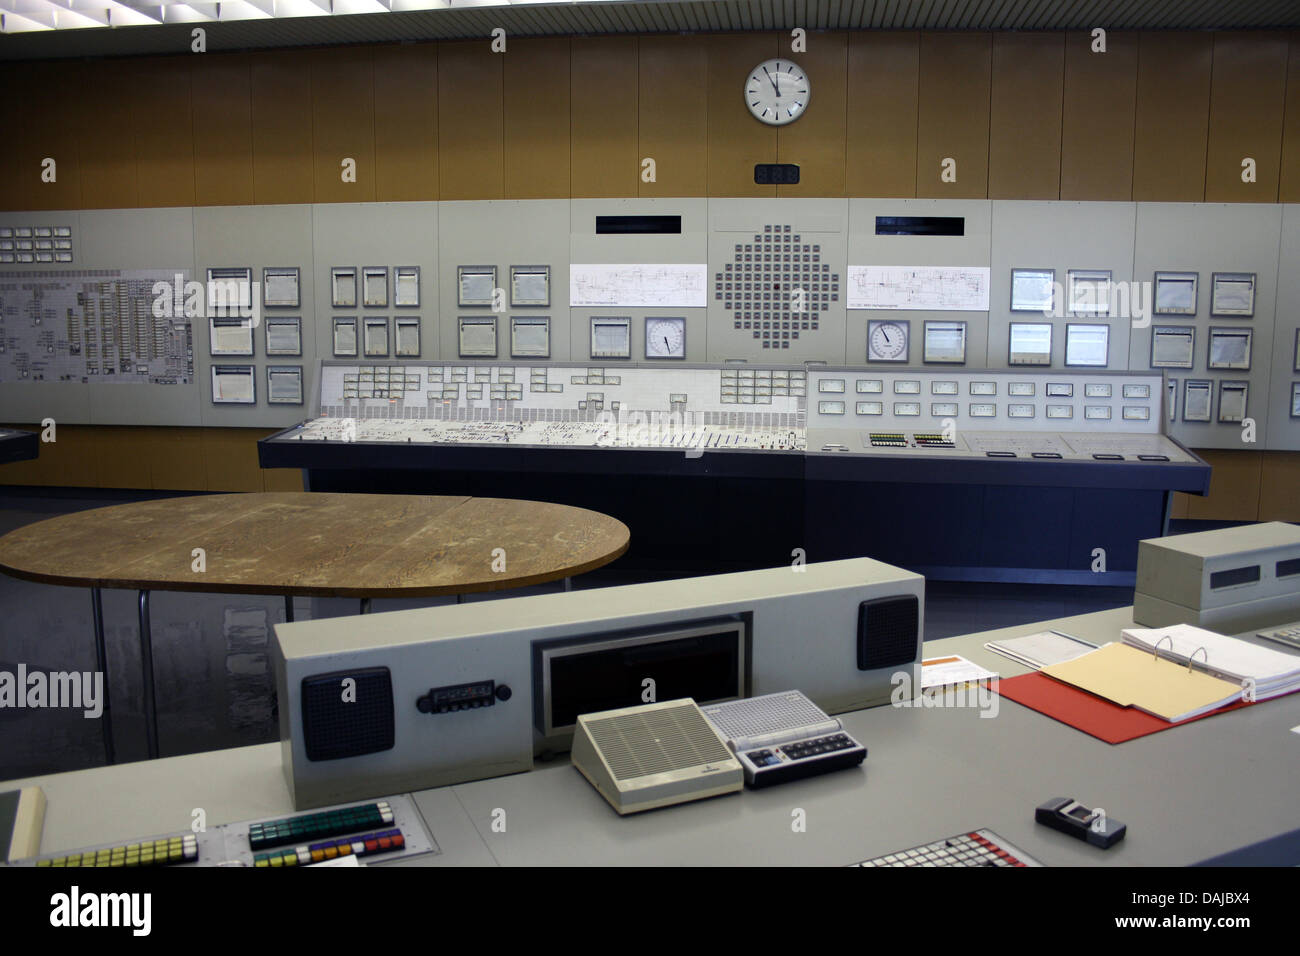 A view of the control room in the disused Austrian nuclear power plant in Zwentendorf, Austria, 01 April 2011. Zwentendorf is probably the most safe nuclear power plant in the world. While people in Japan are fleeing from the disaster in the nuclear power plant in Fukushima, this disused, almost structurally identical  reactor is attracting thousands of curious visitors. Photo: Mir Stock Photo